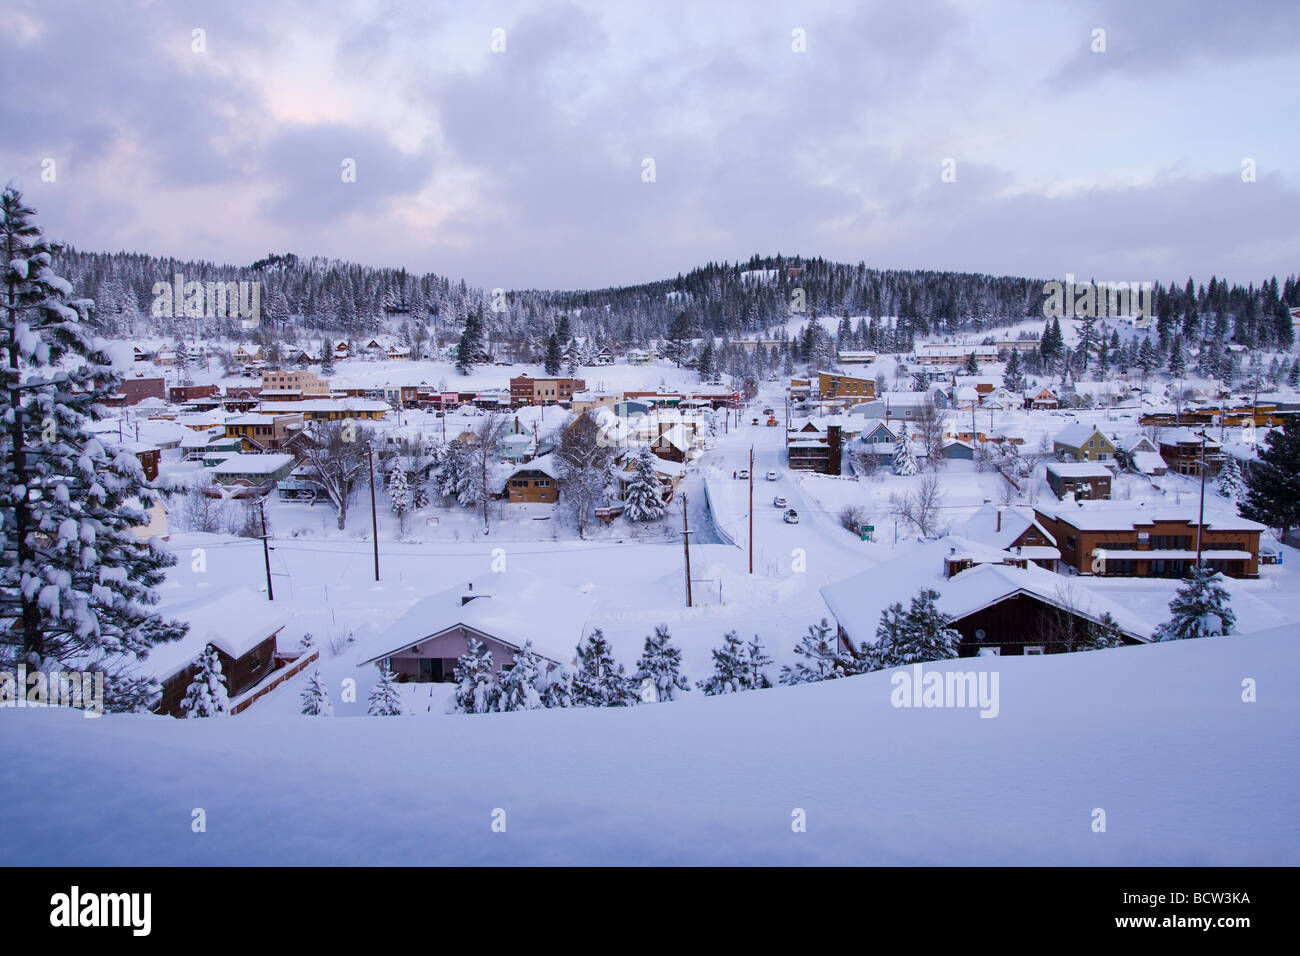 Snow covered houses in a town, Truckee, California, USA Stock Photo